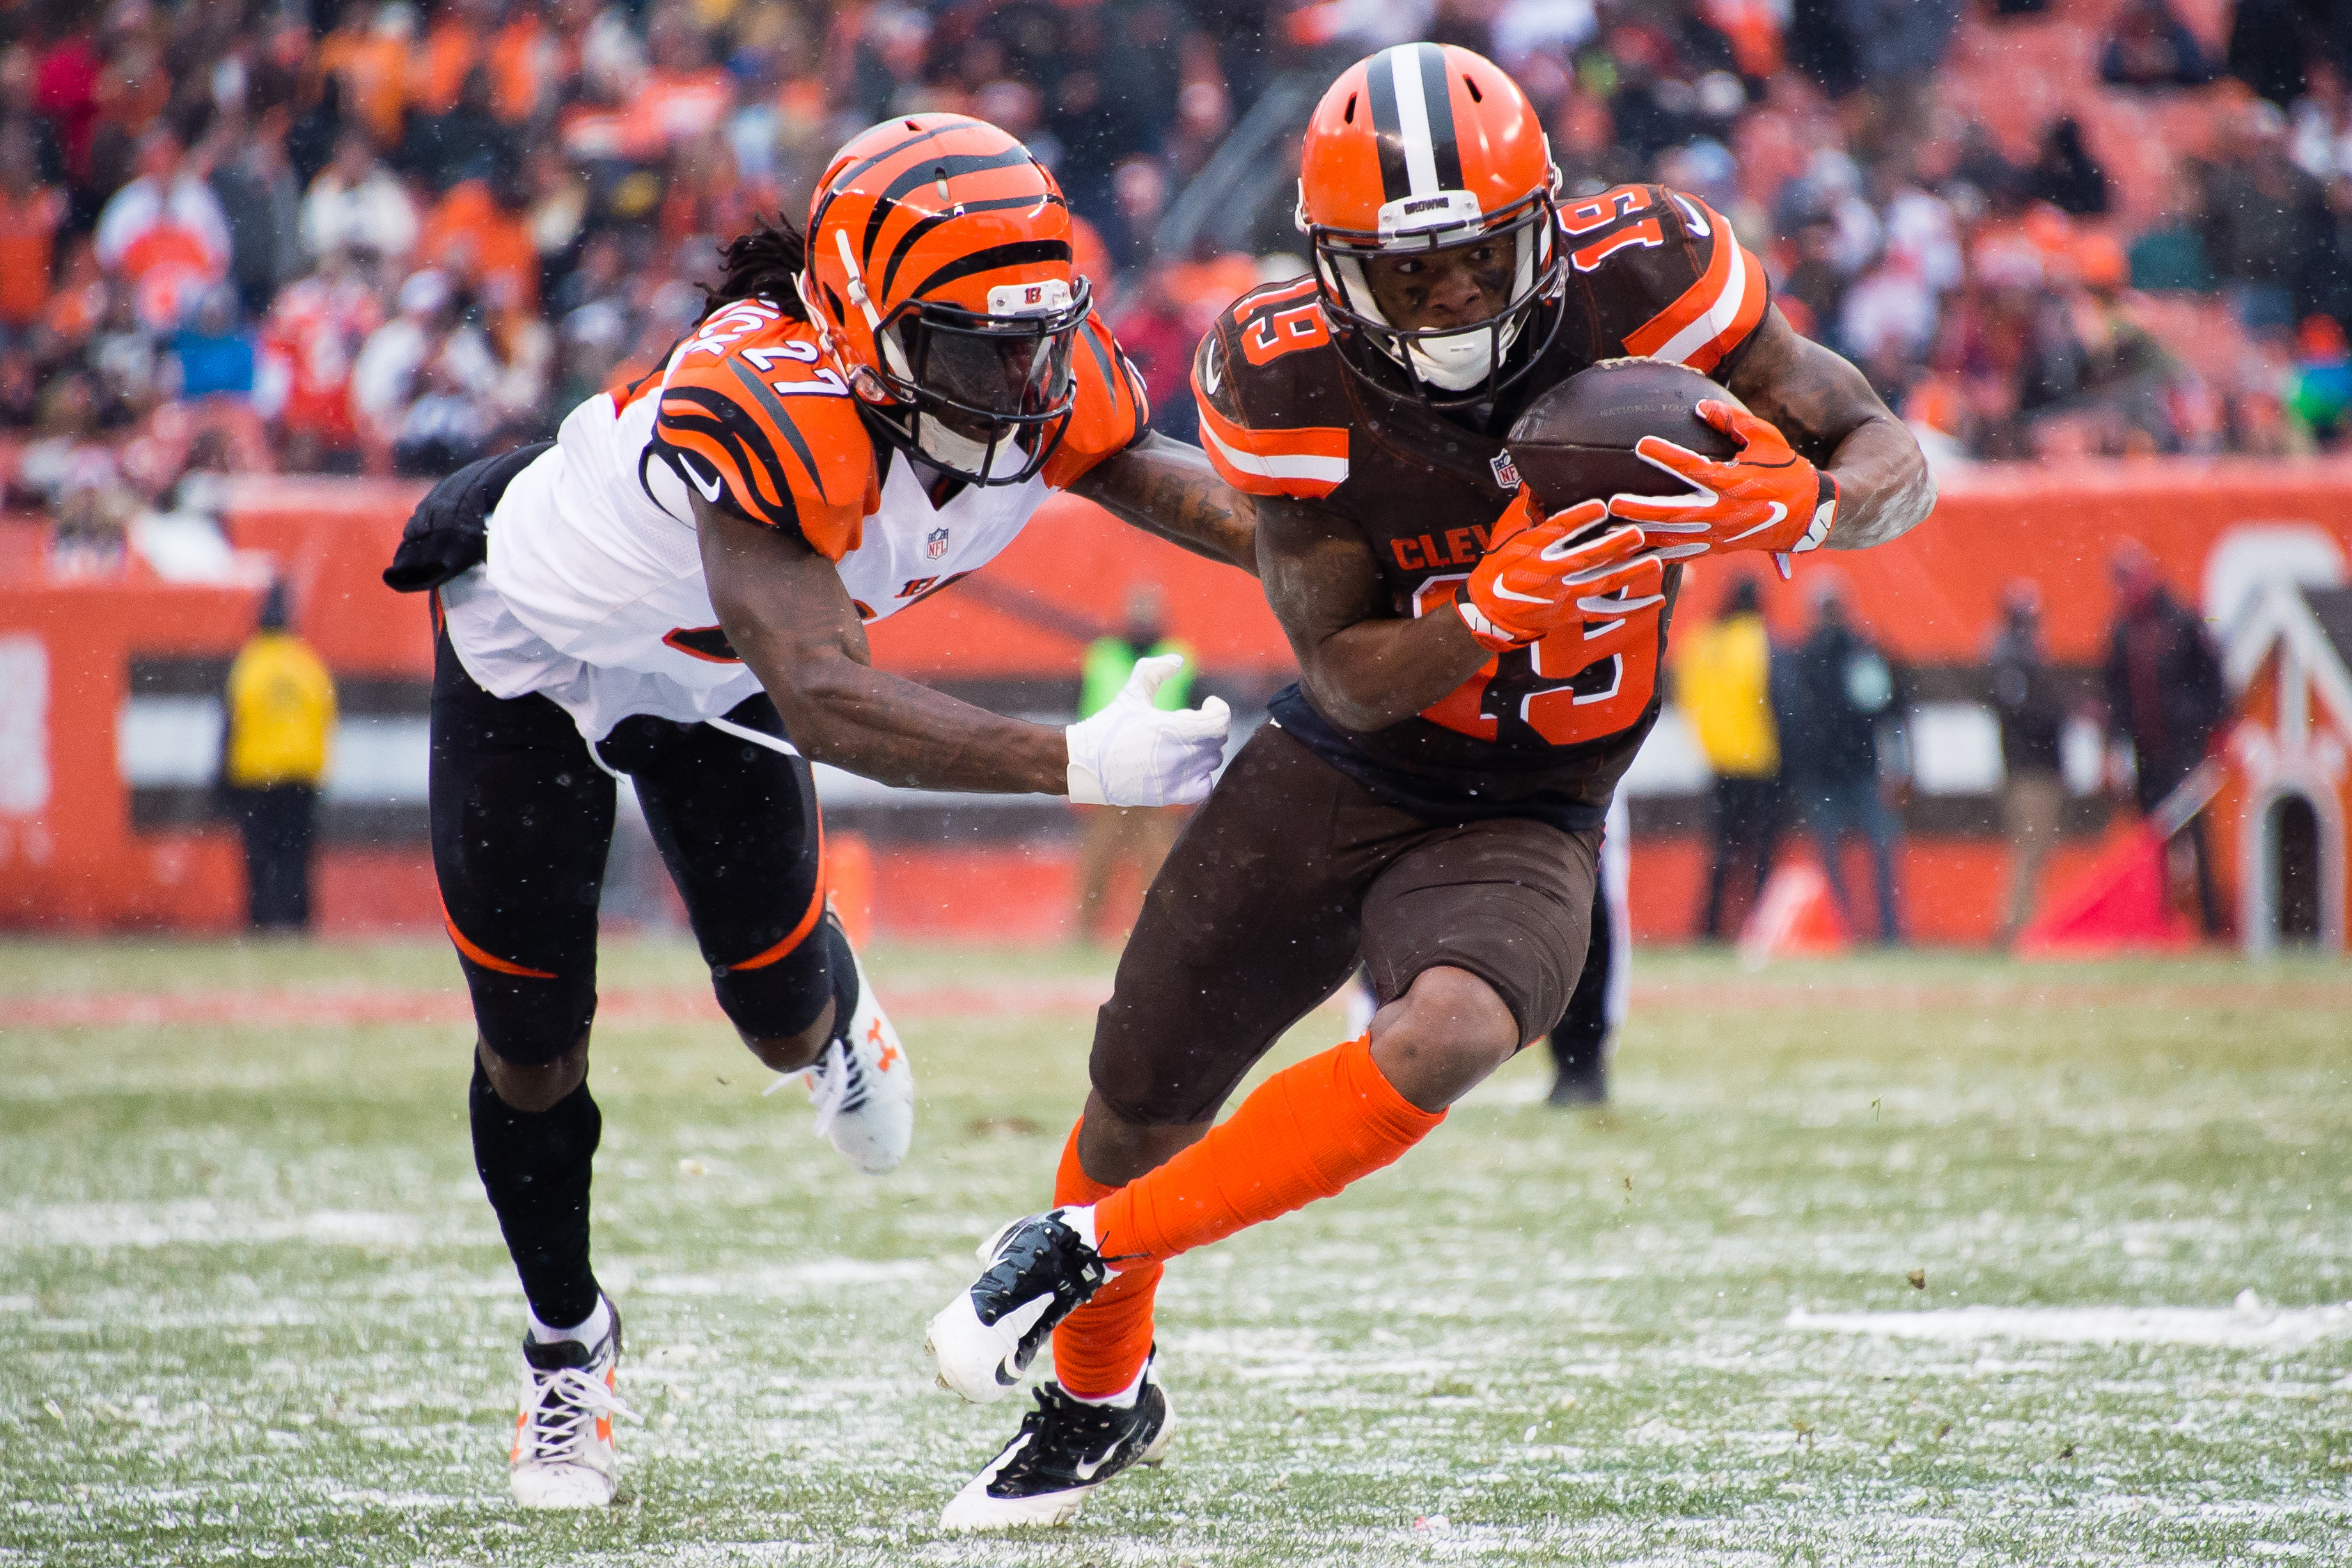 Cleveland Browns Trade Corey Coleman To Buffalo Bills For A Draft Pick: Report